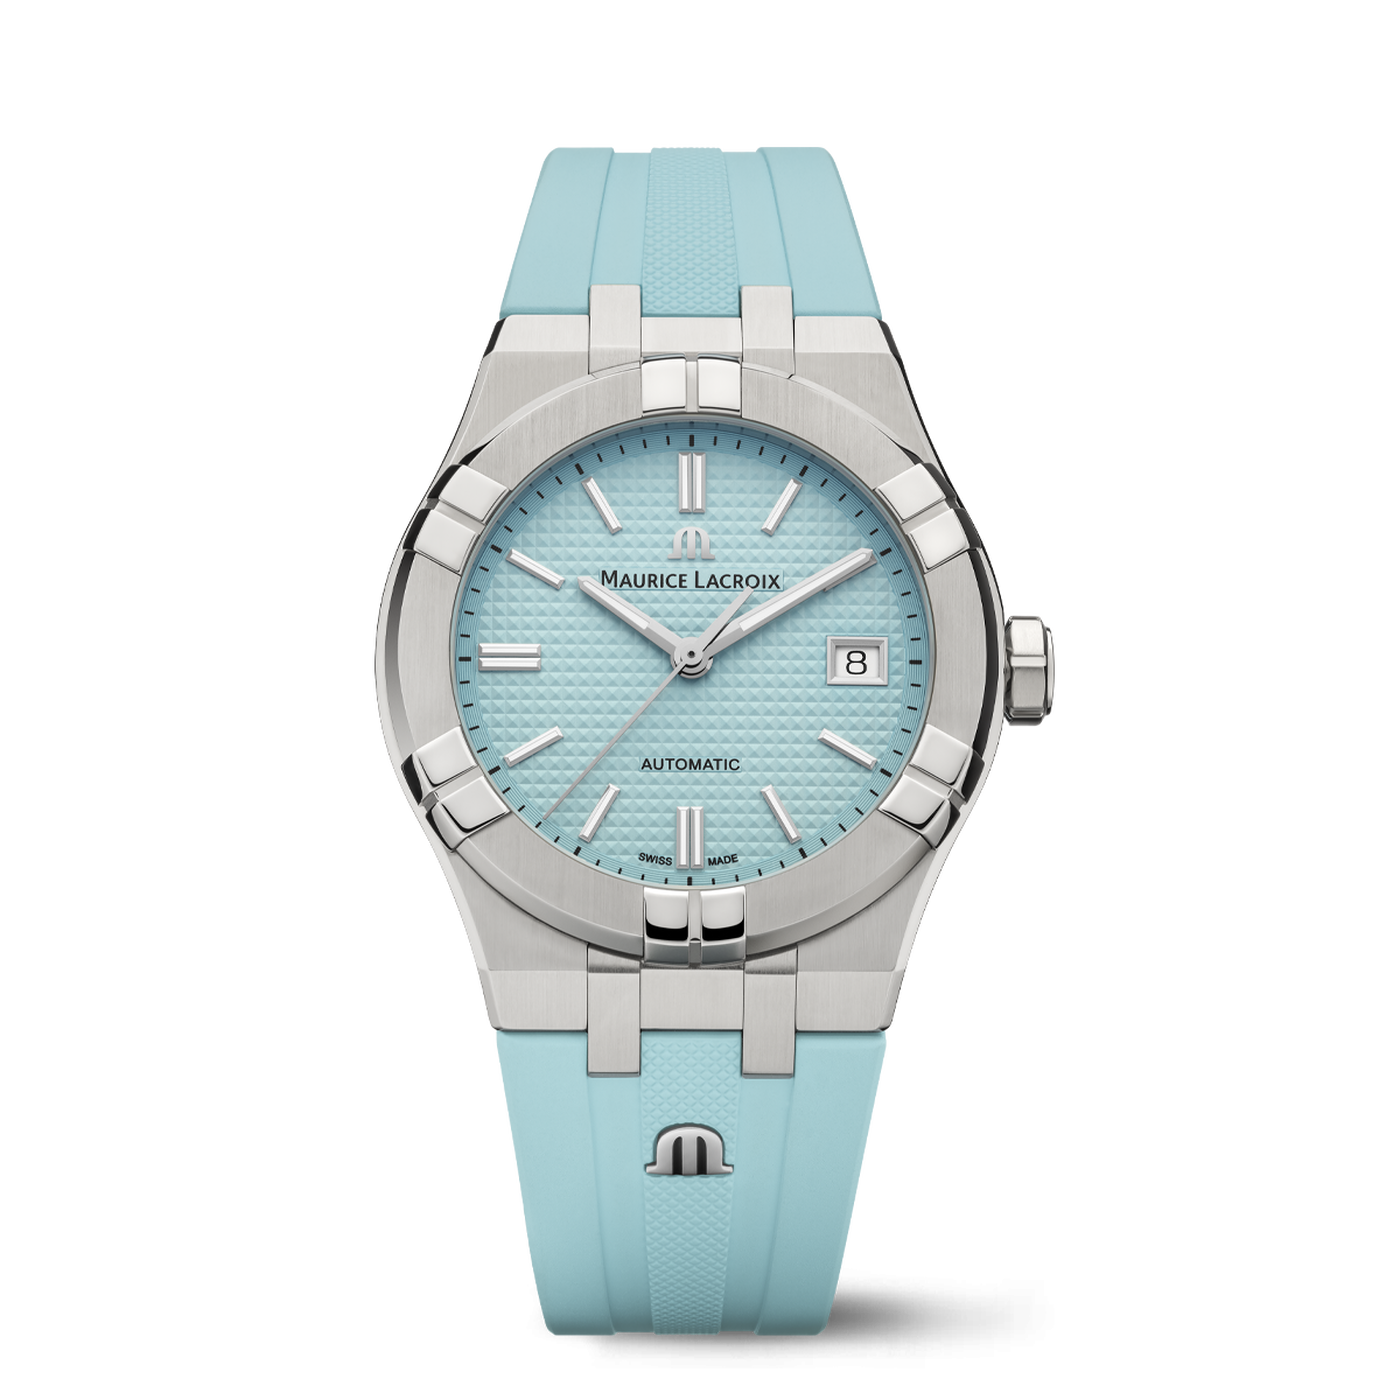 AIKON AUTOMATIC LIMITED SUMMER EDITION 39MM